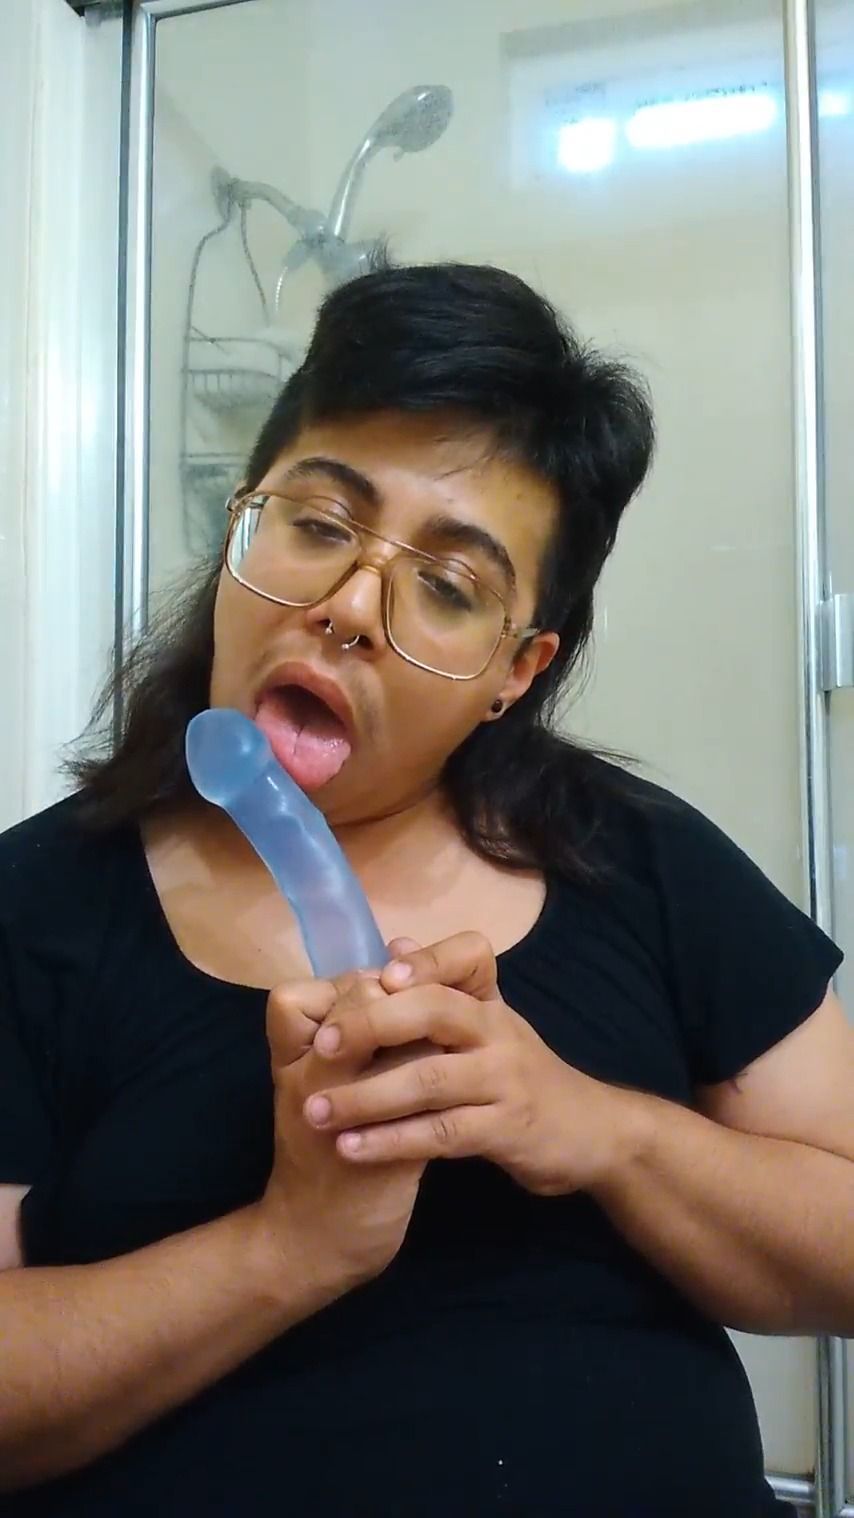 Amateur gagging while deep throating